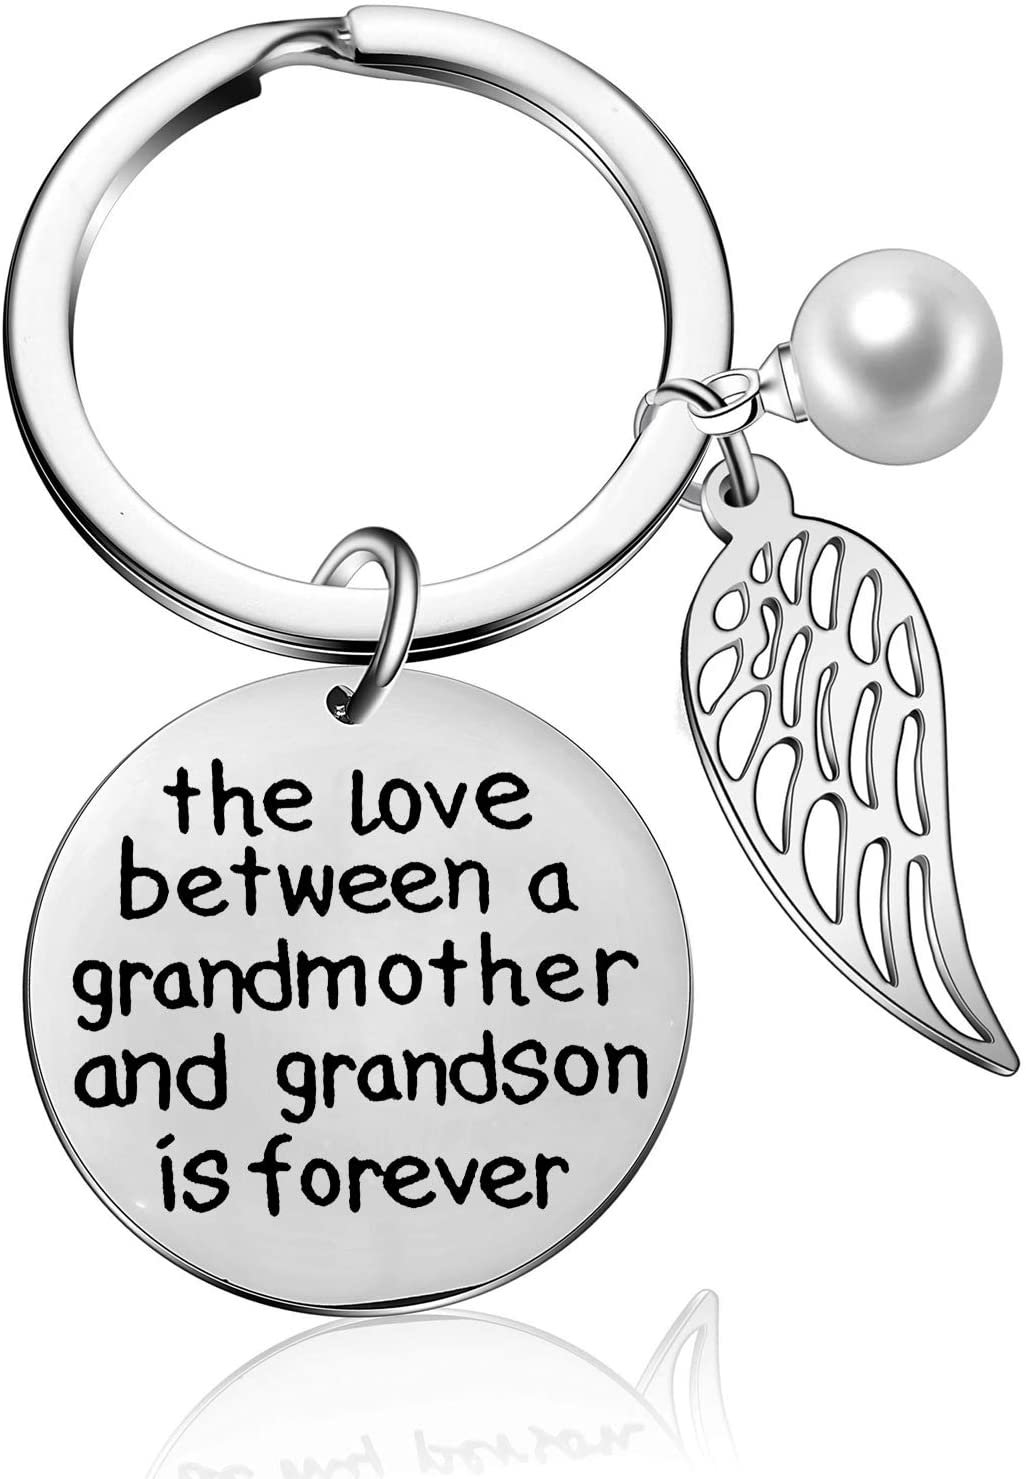 The Love Between a Grandmother and Granddaughter/Grandson is Forever Keychain Keychain GrindStyle Grandmother and Grandson 